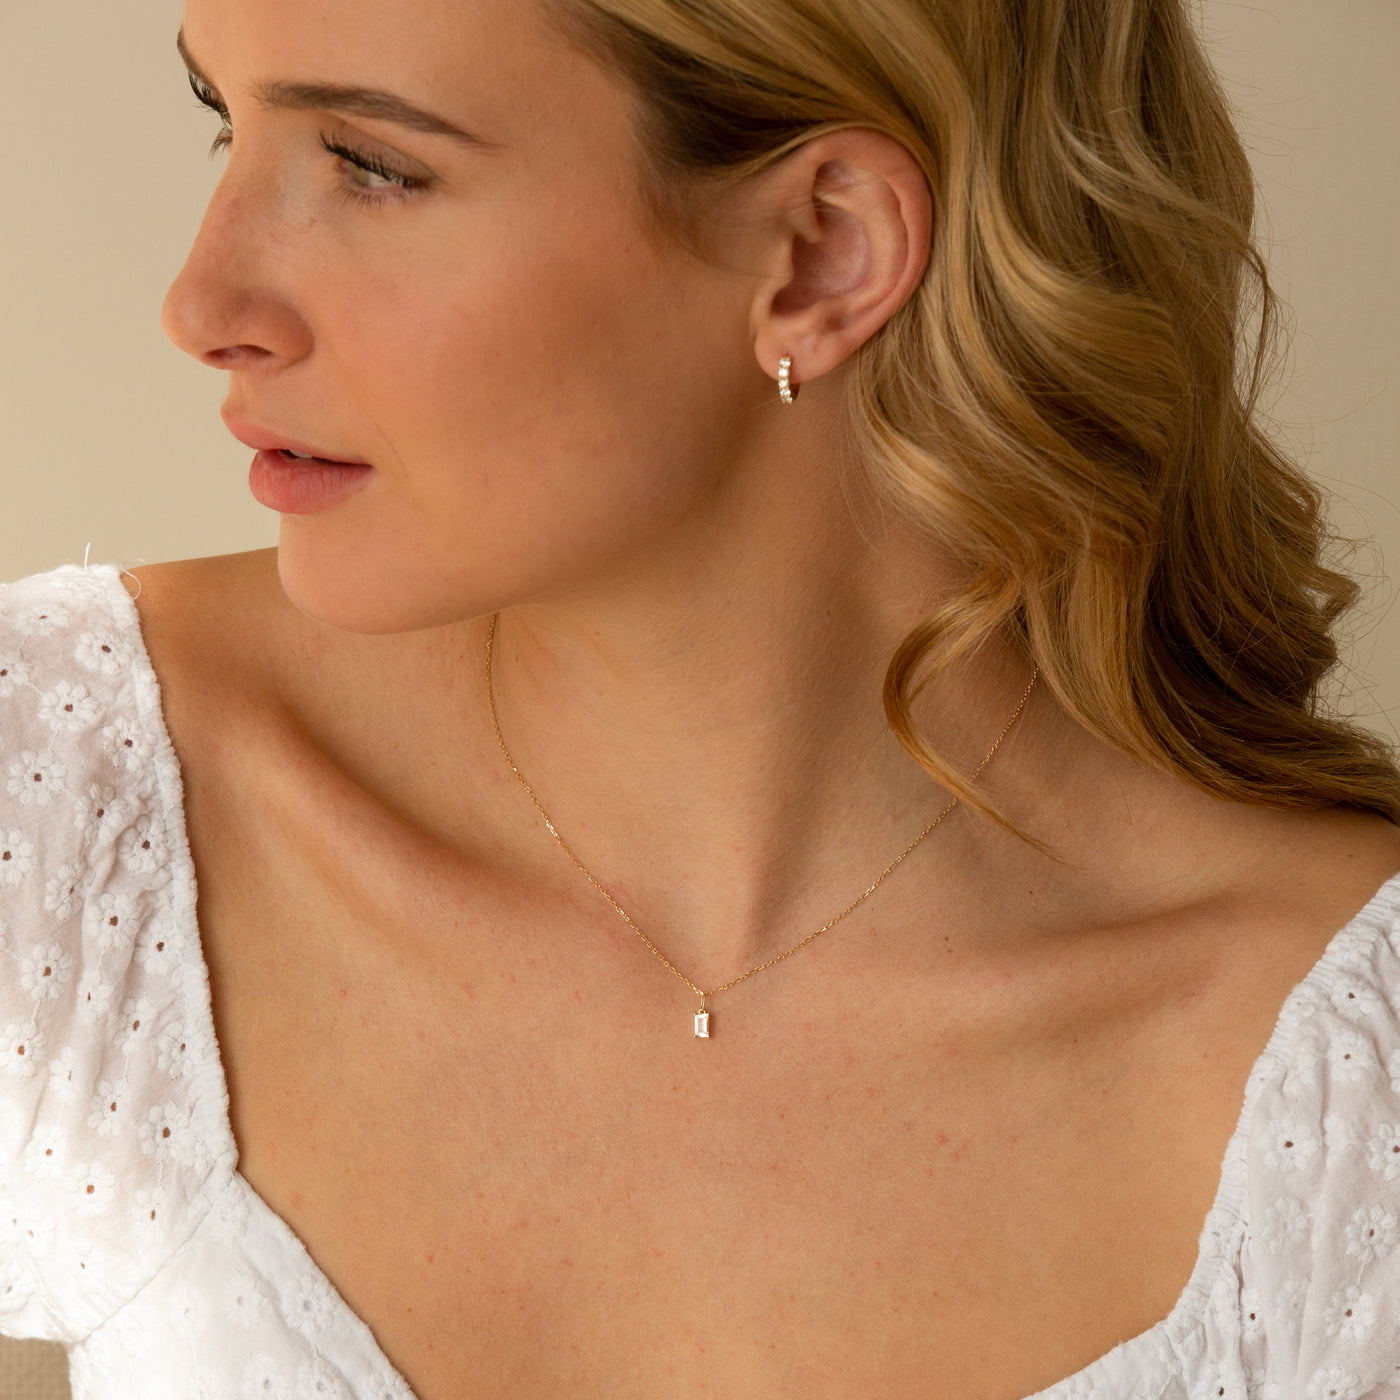 White Topaz Baguette Necklace | Simple & Dainty Jewelry